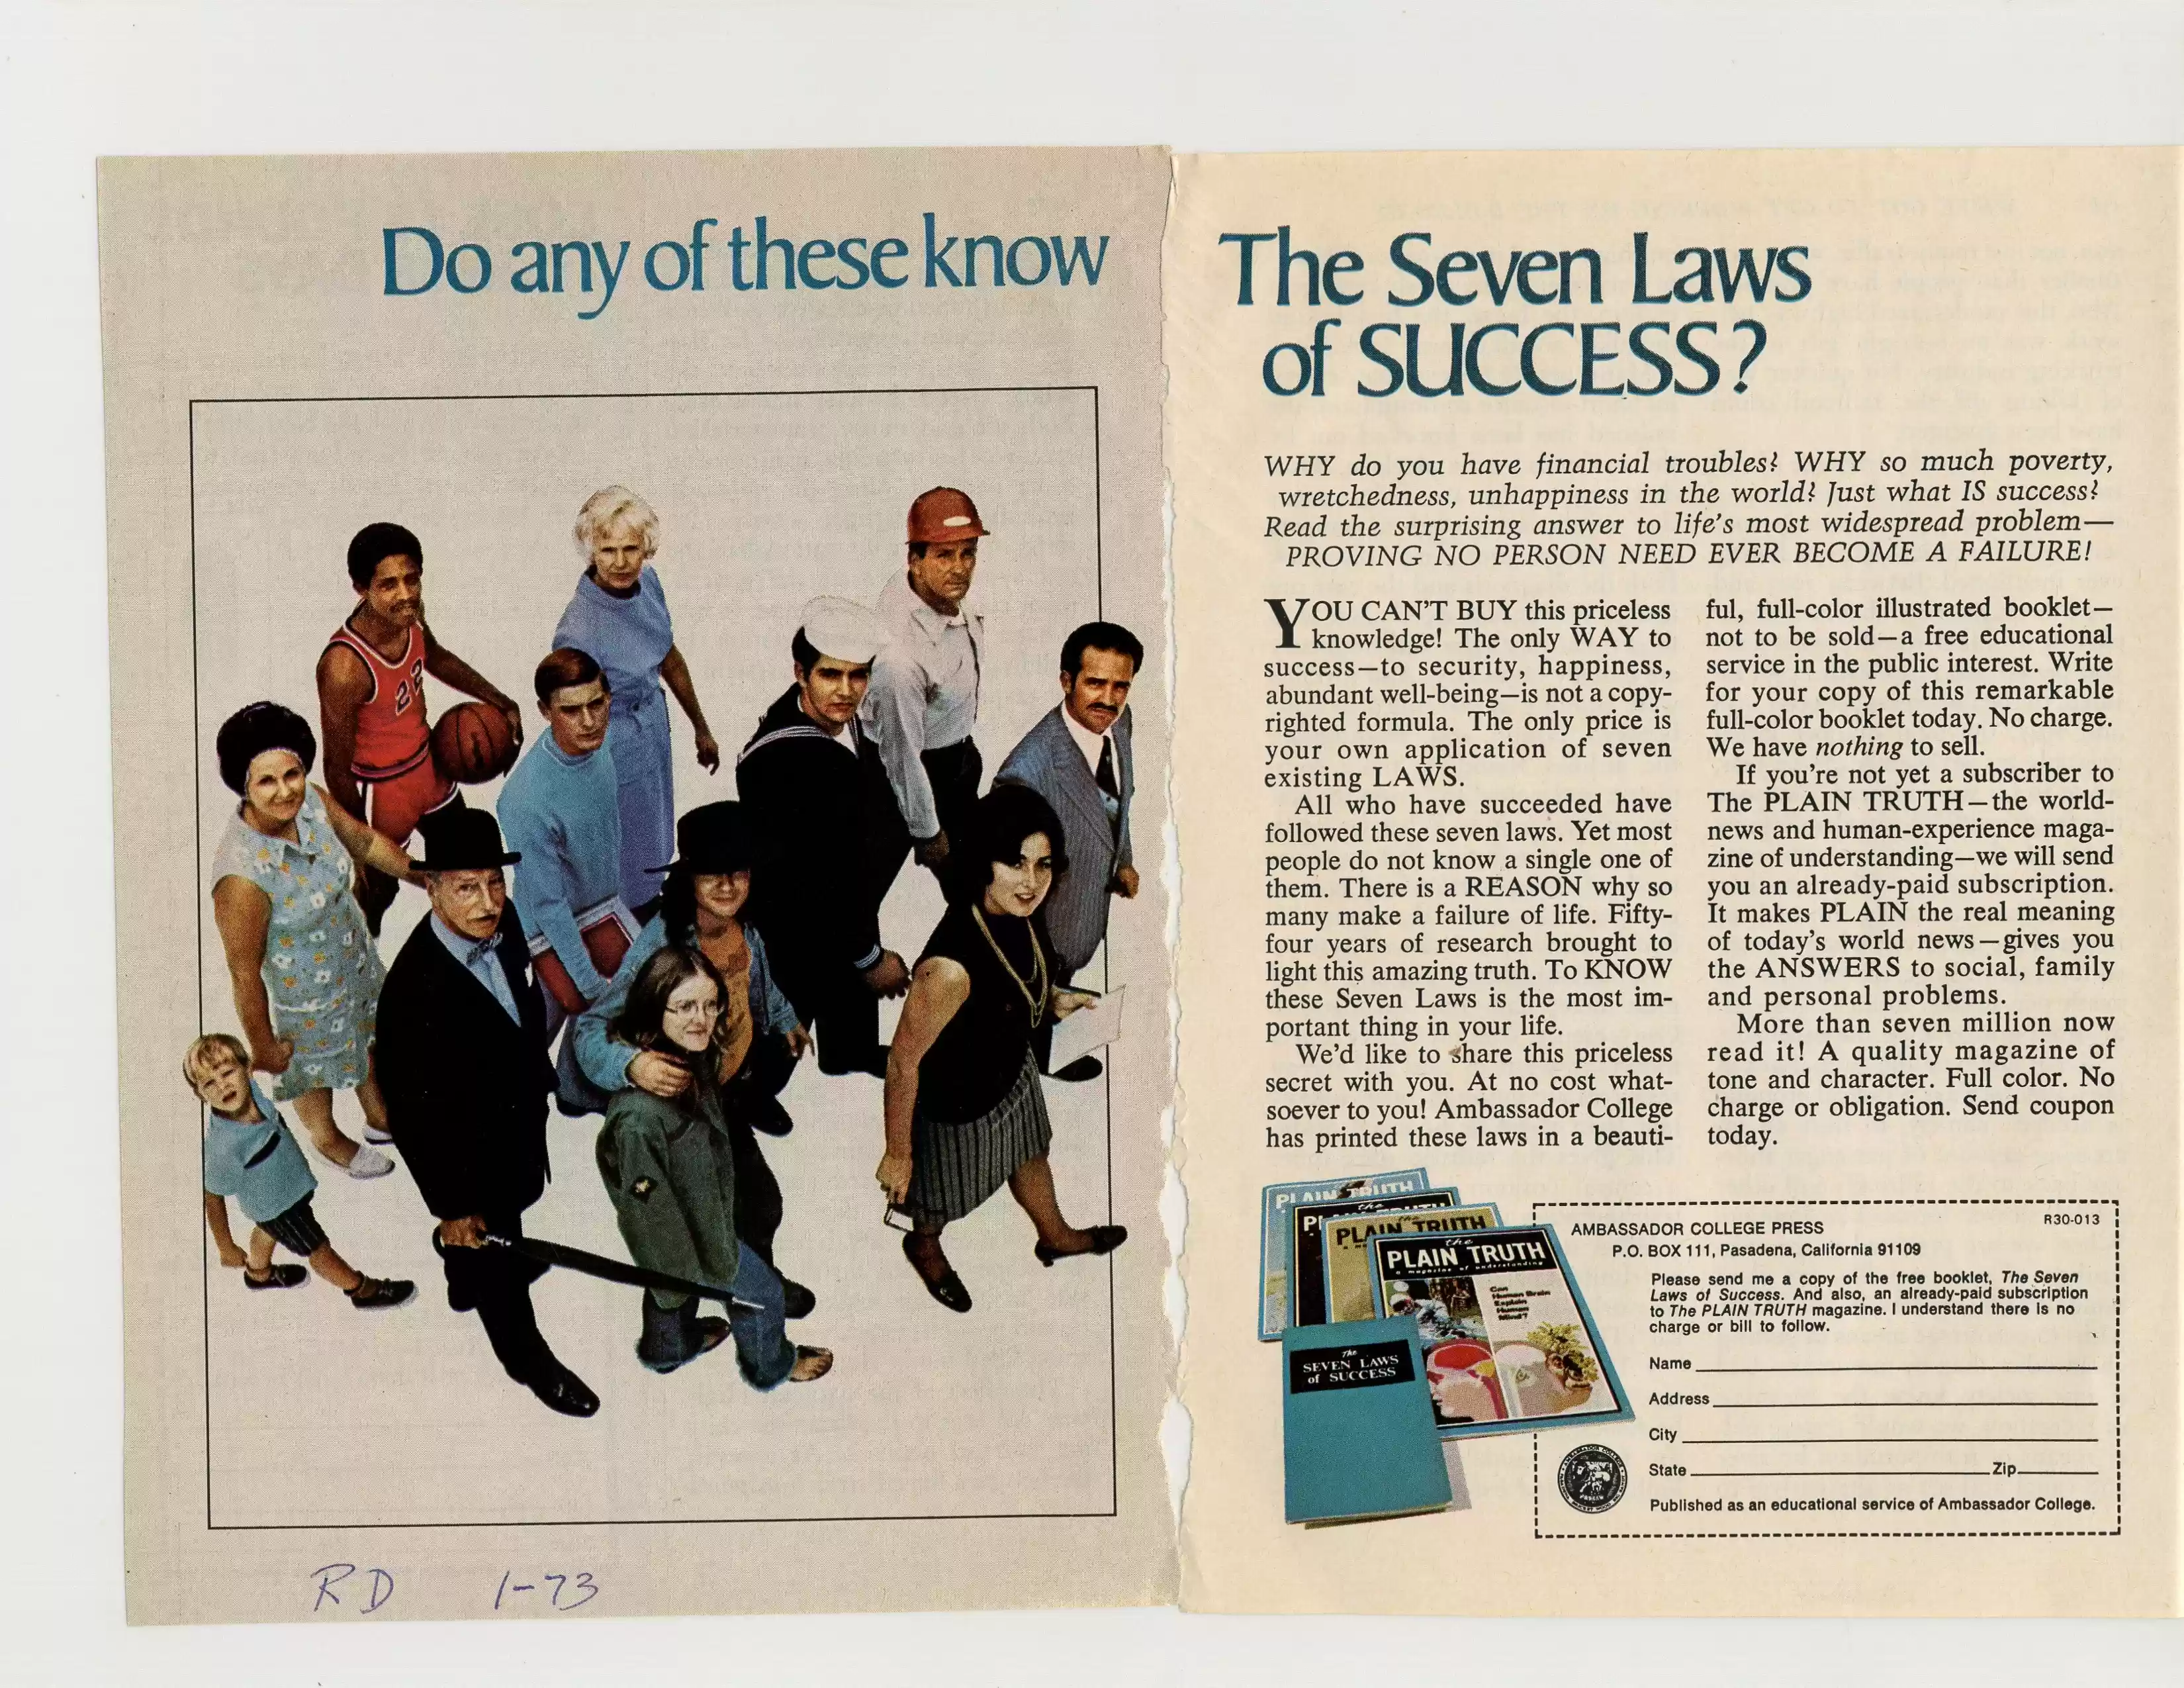 7 Laws of Success_Readers digest ad  1-1973, p176-7